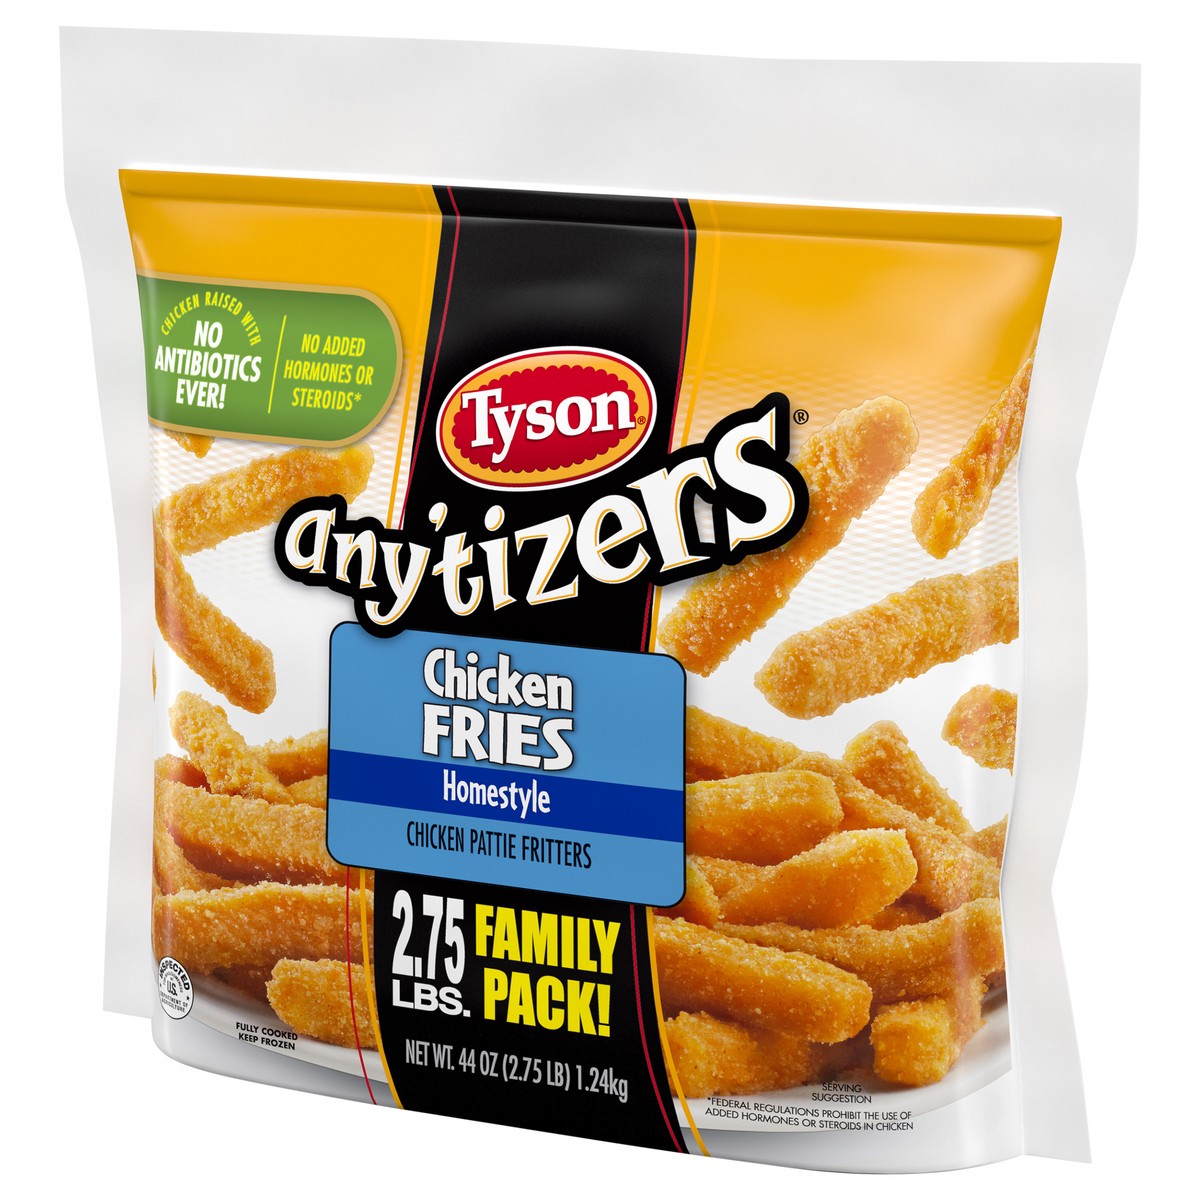 slide 4 of 6, TYSON ANYTIZERS Tyson Any'tizers Homestyle Chicken Fries, 44 oz. Family Pack (Frozen), 1.25 kg